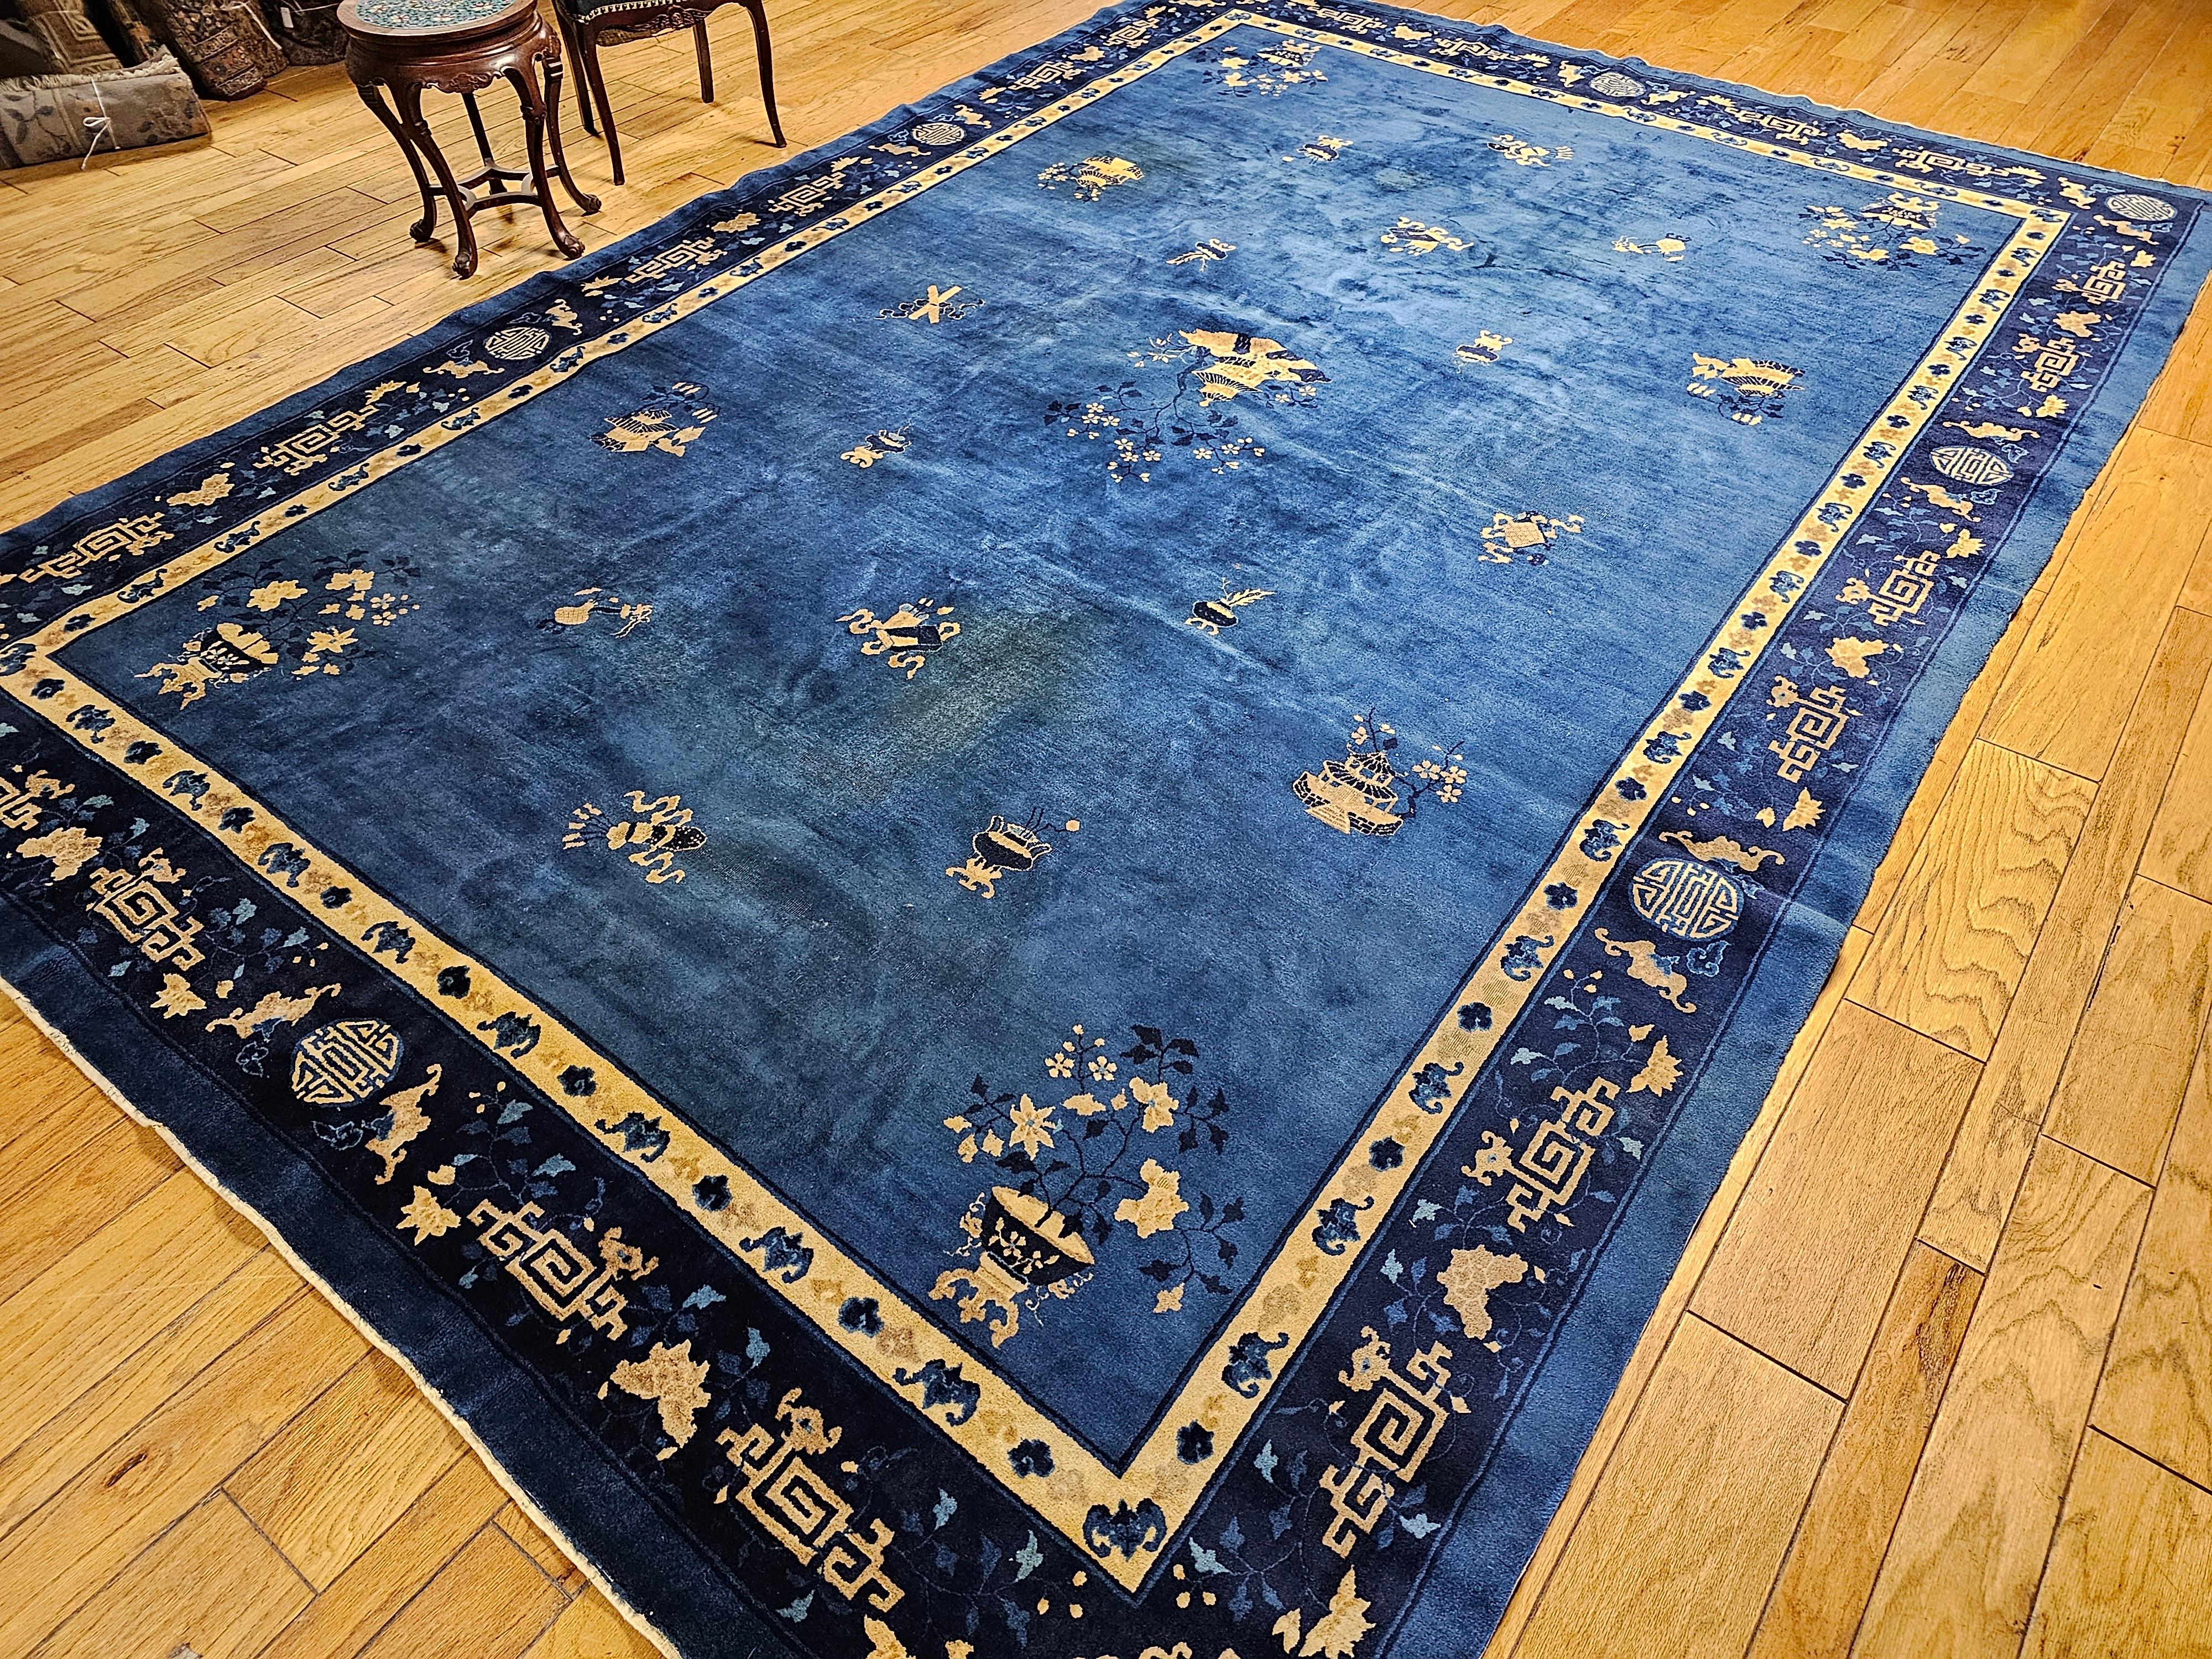 Vintage Art Deco Chinese Rug with Auspicious Symbols in Royal Blue, Navy, Camel For Sale 7